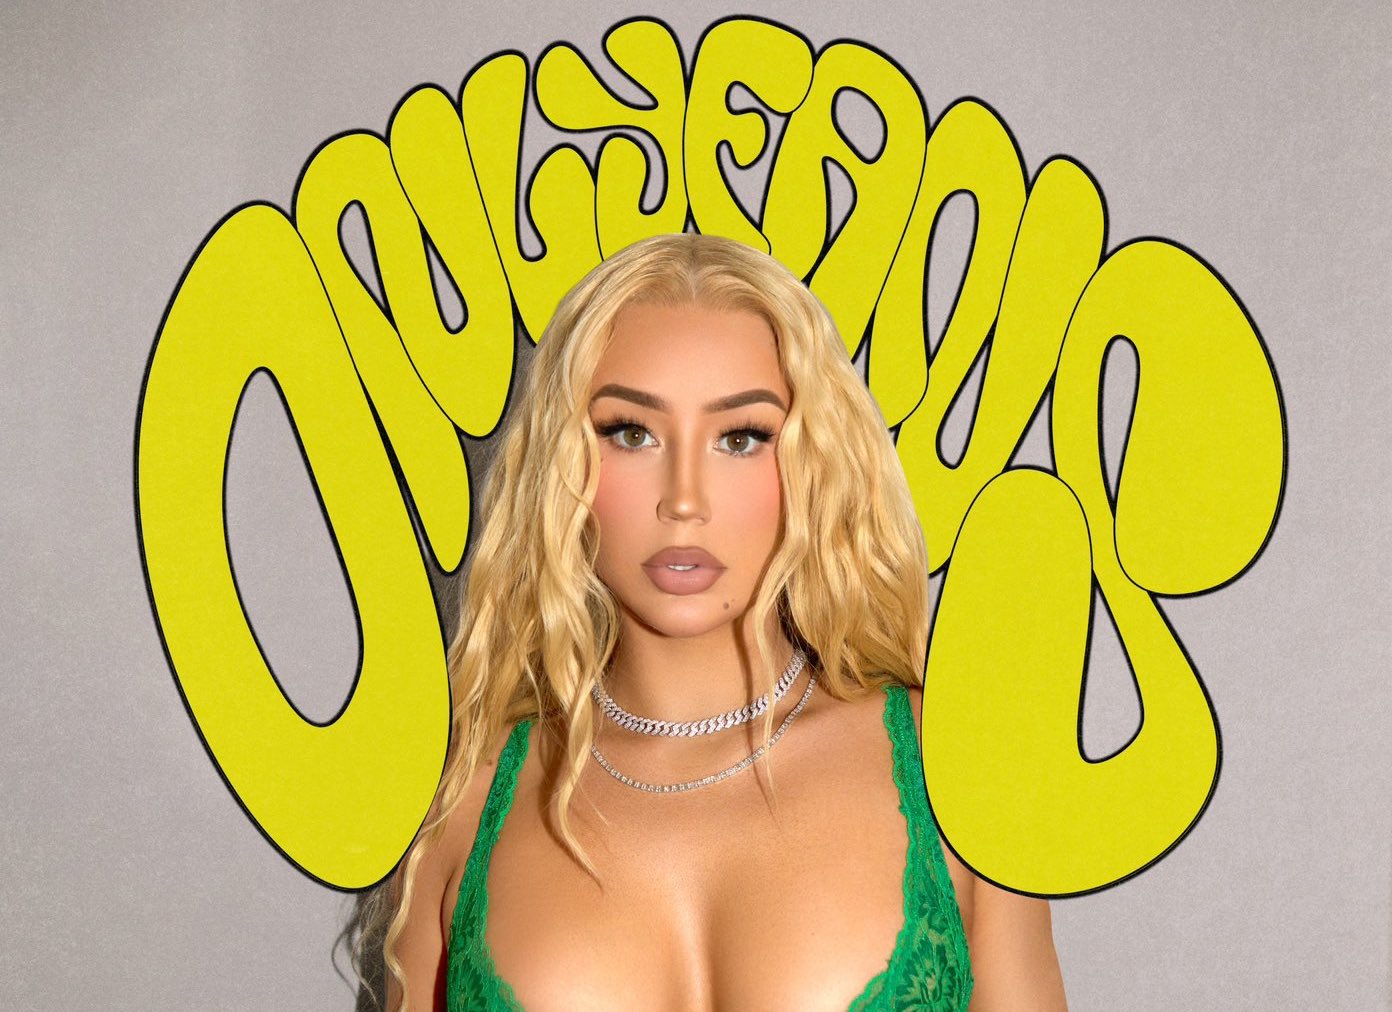 Iggy Azalea Joins OnlyFans, Promises Content Will Be ‘Hotter Than Hell’